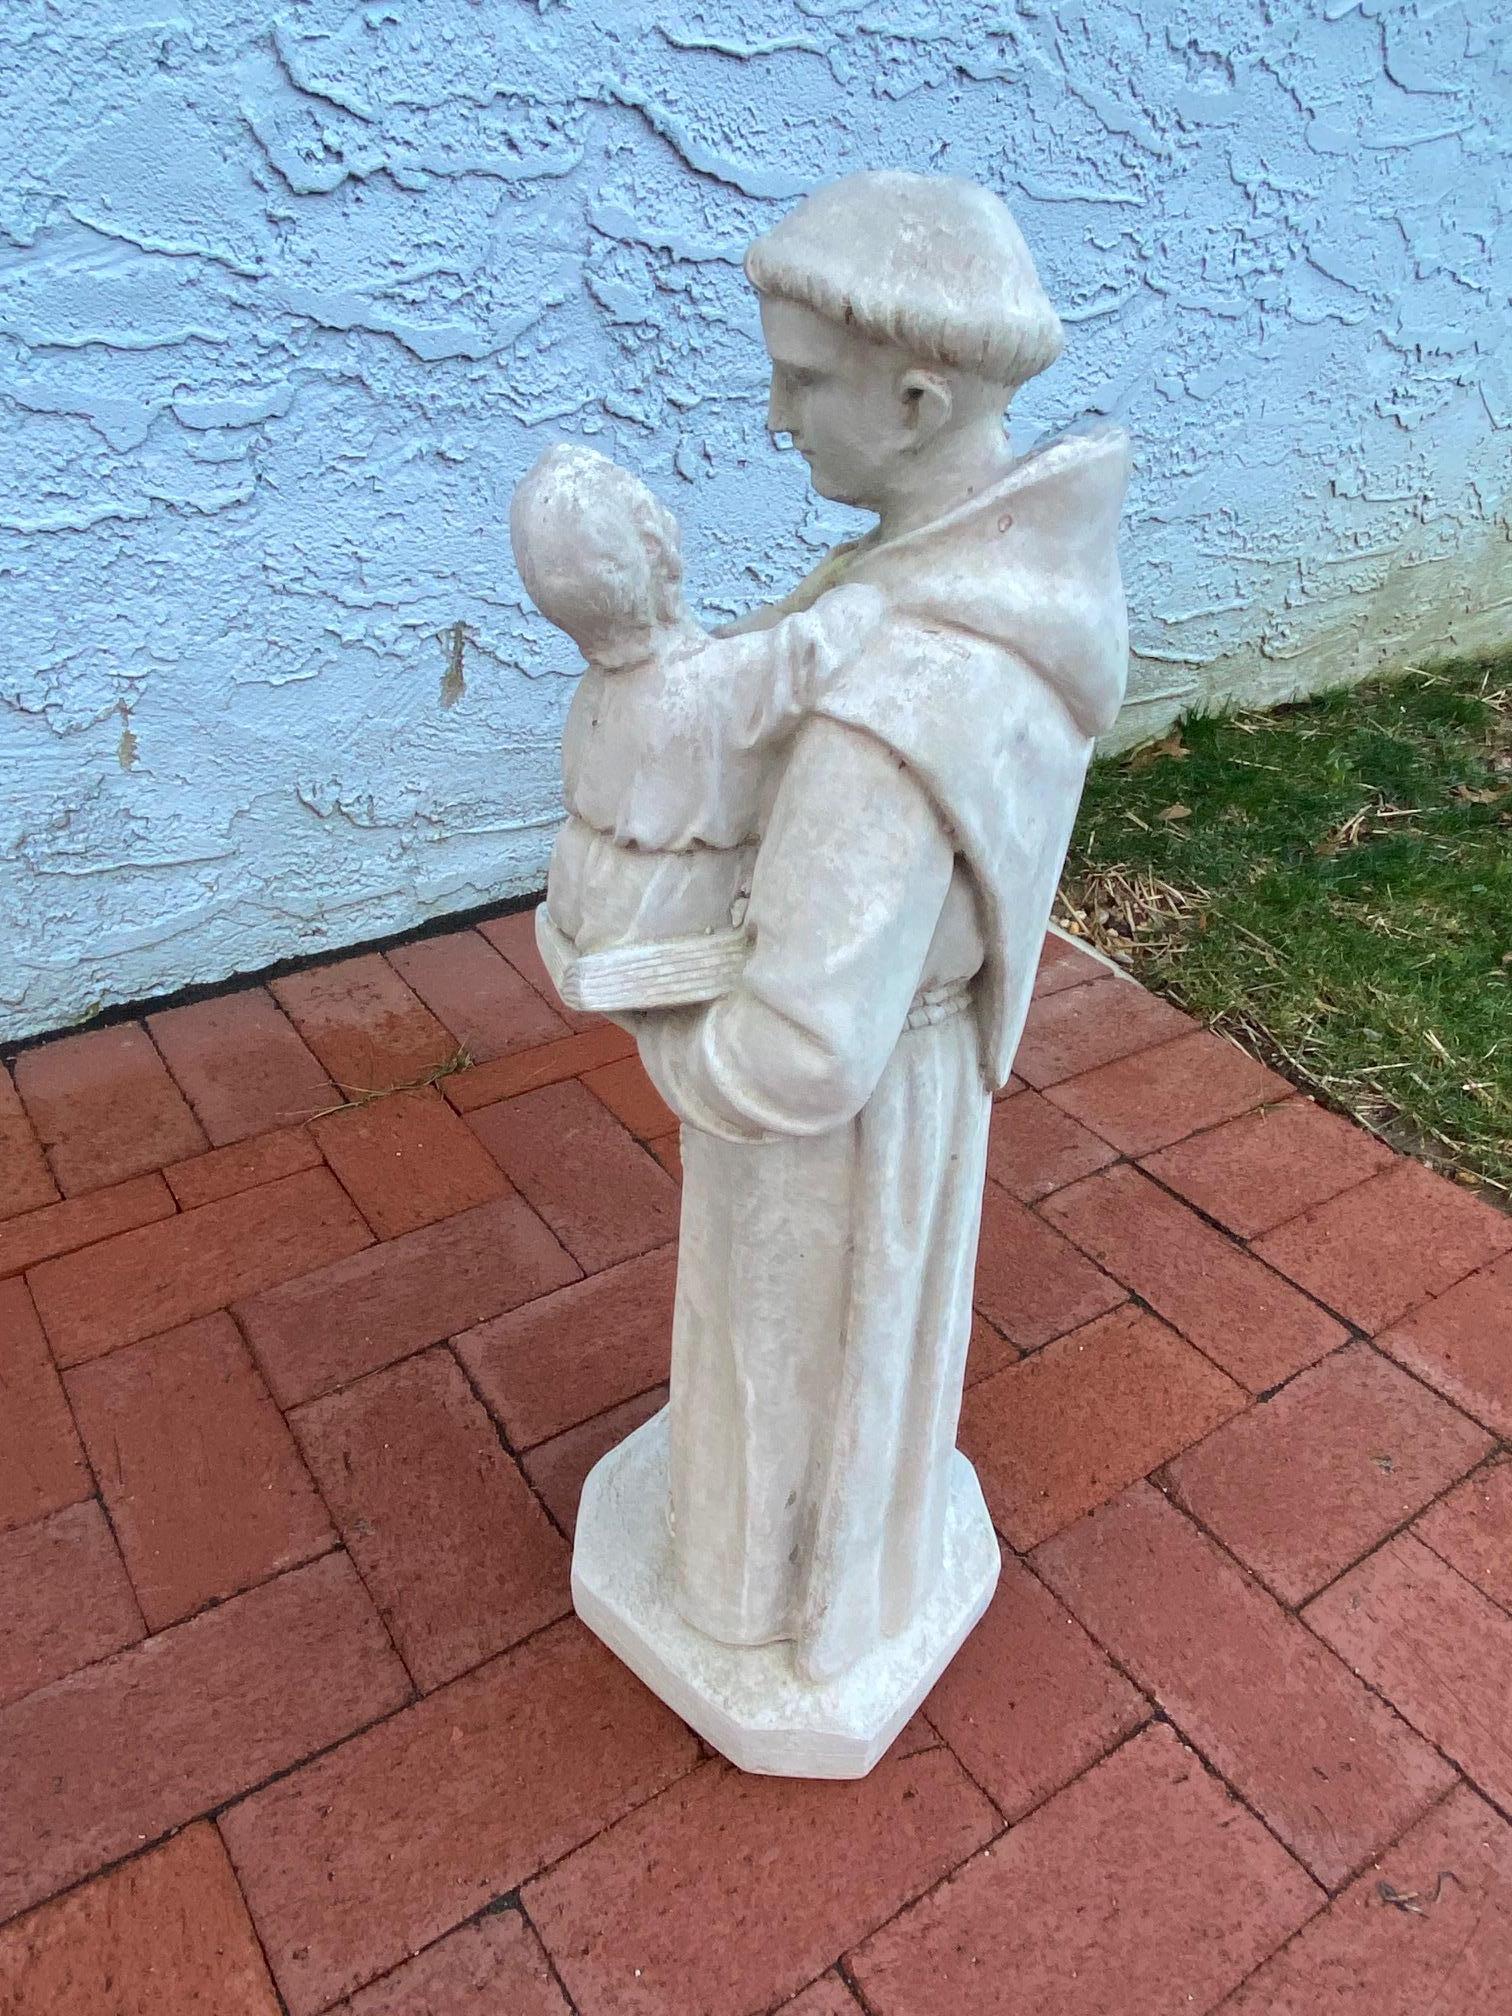 Lovely cement sculpture of St. Anthony draped in a monk's robe and holding a baby in his arms.